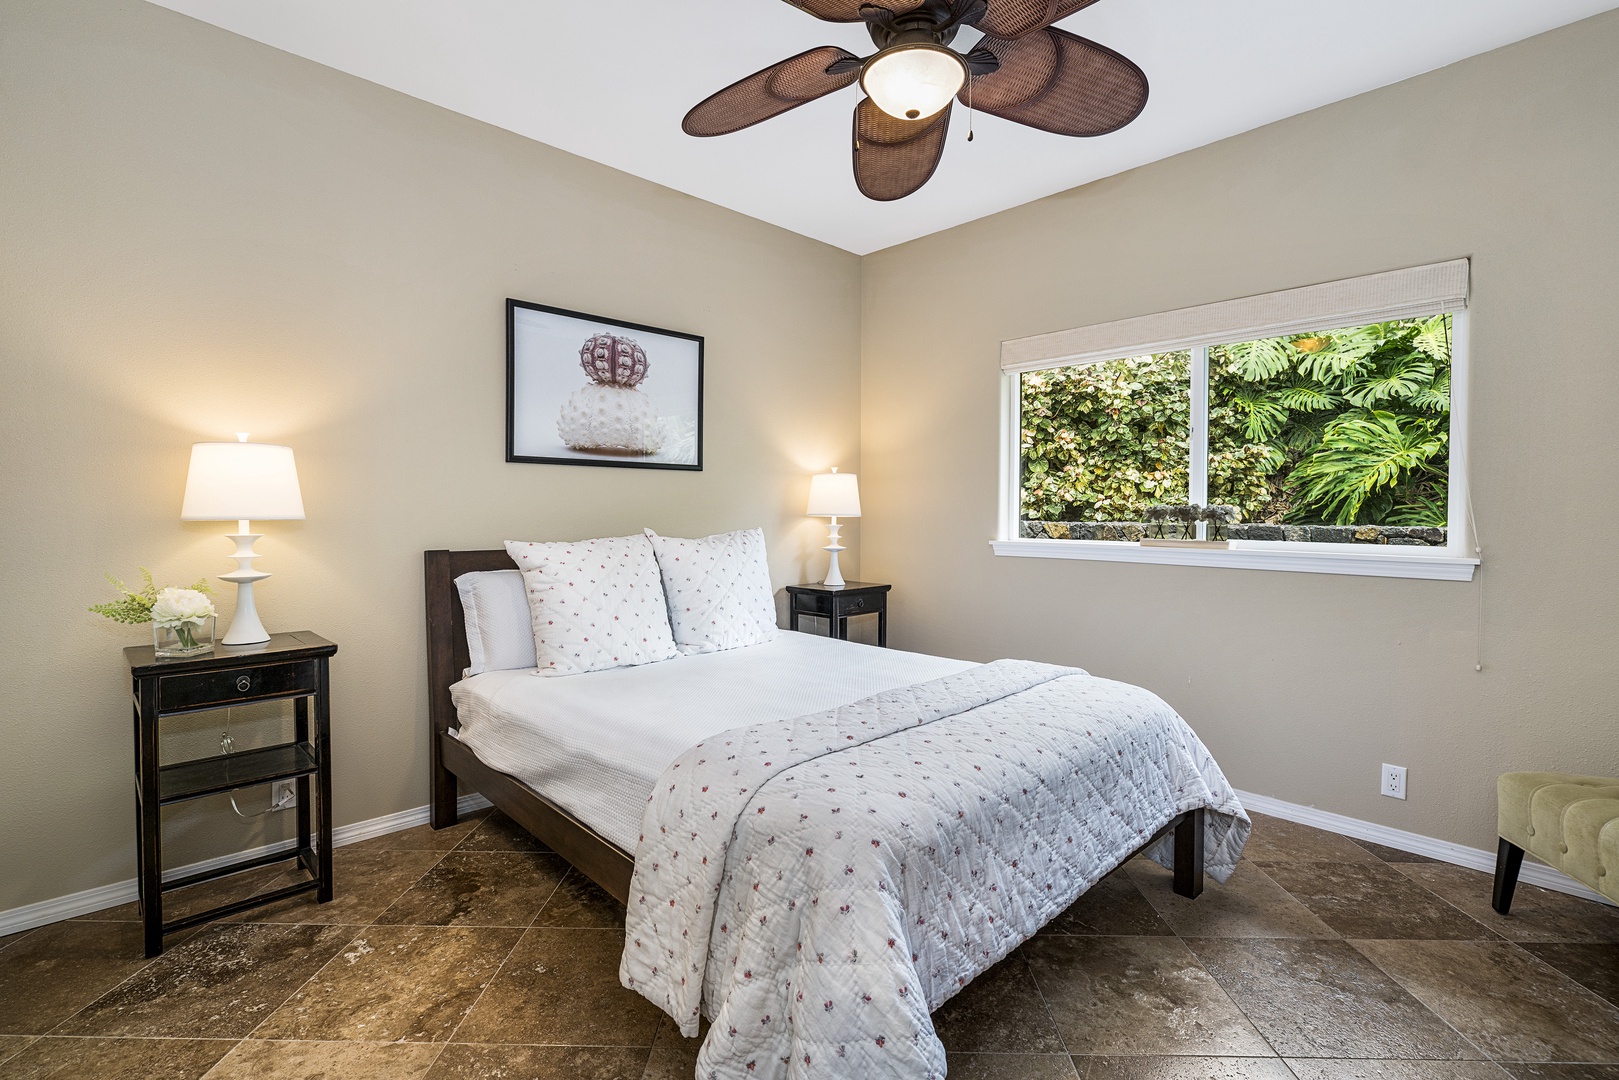 Kailua Kona Vacation Rentals, Sunset Hale - Guest bedroom equipped with memory foam Queen bed & A/C